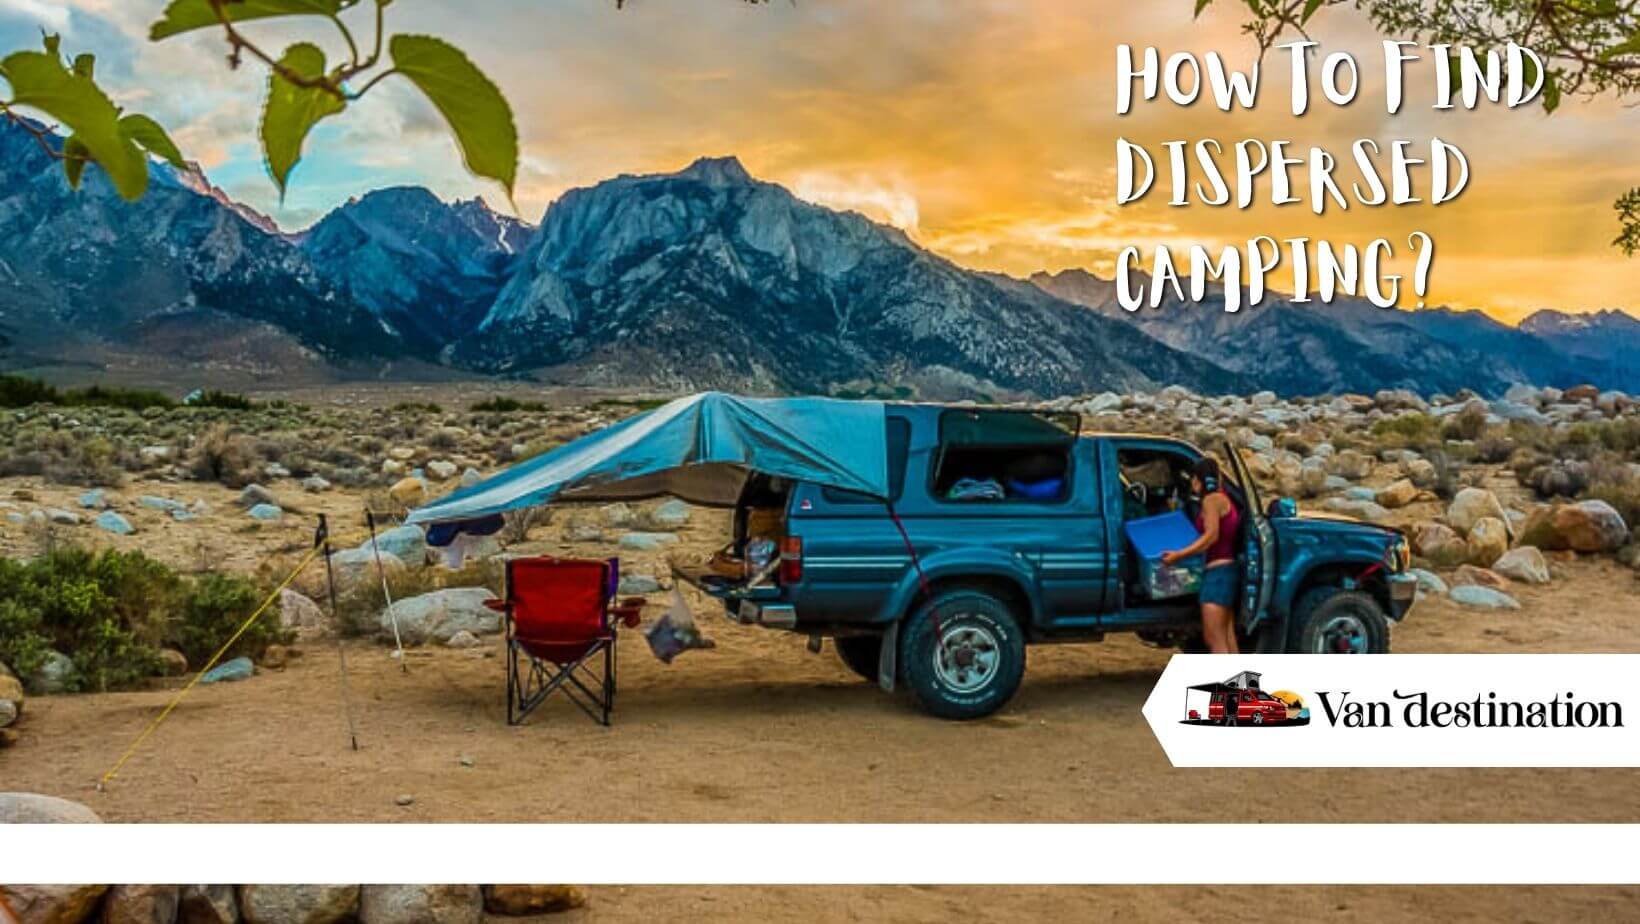 How To Find Dispersed Camping